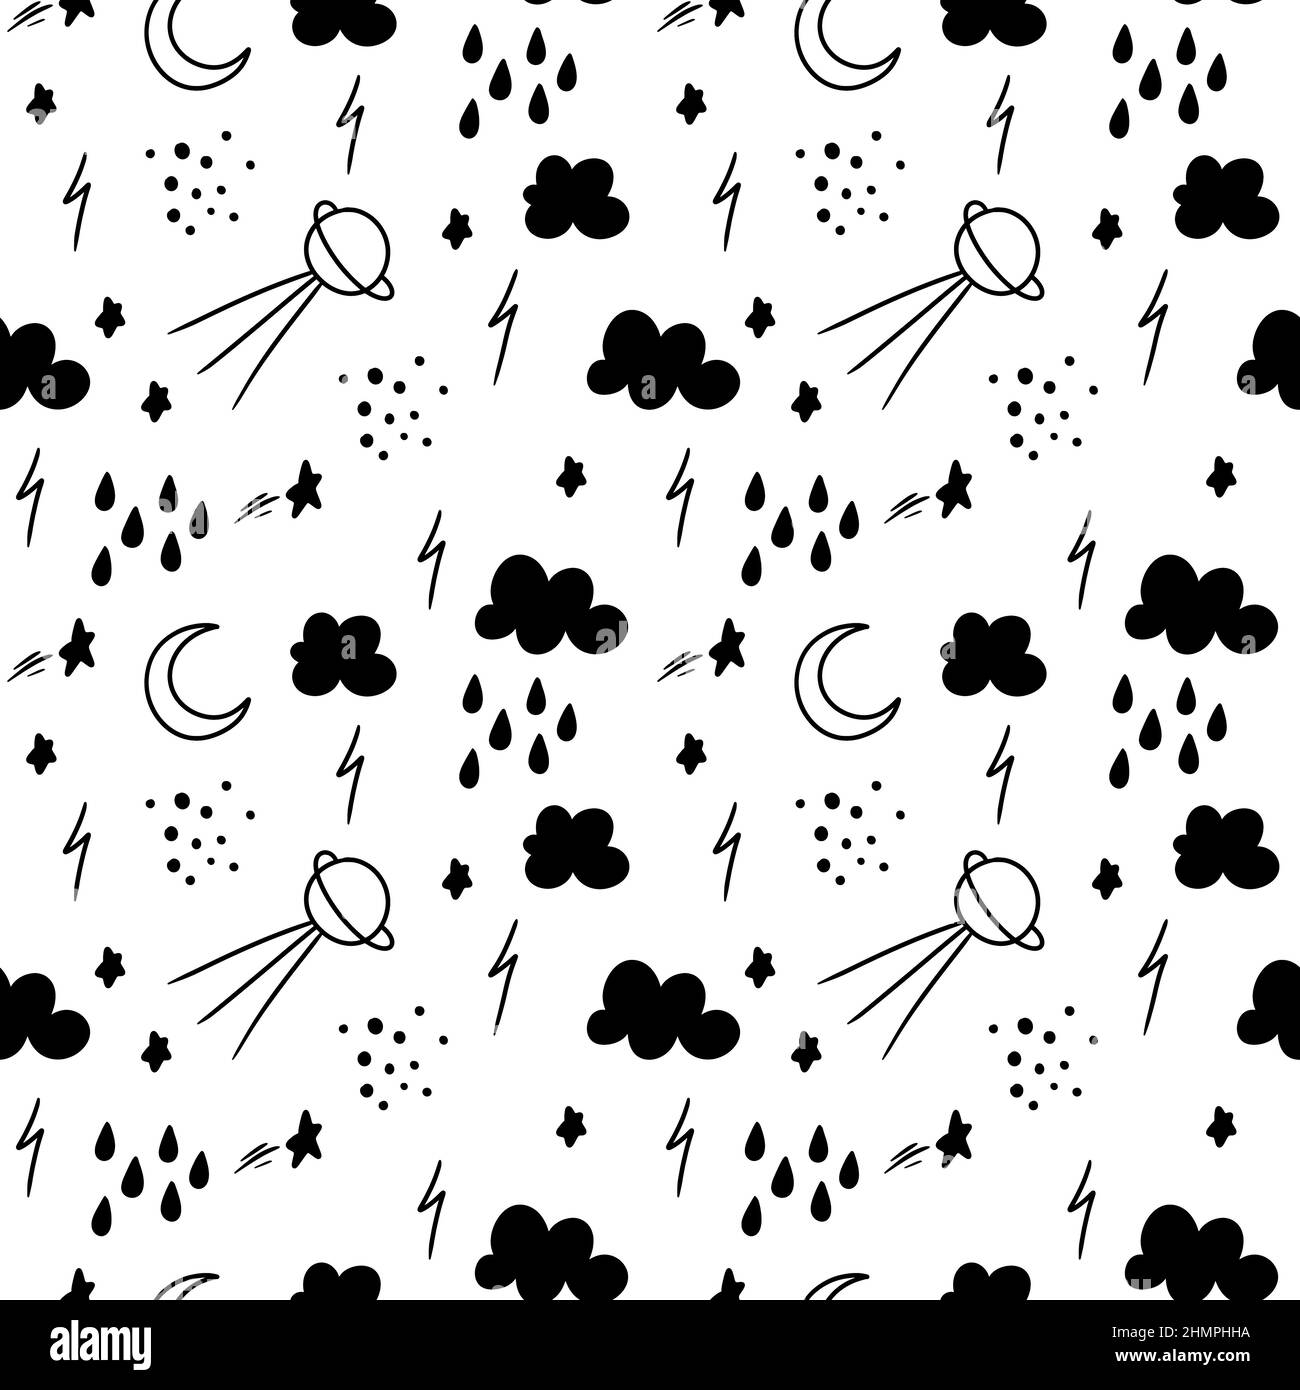 Kids seamless pattern with clouds, plantes, stars, raindrops and satellite. Stock Vector